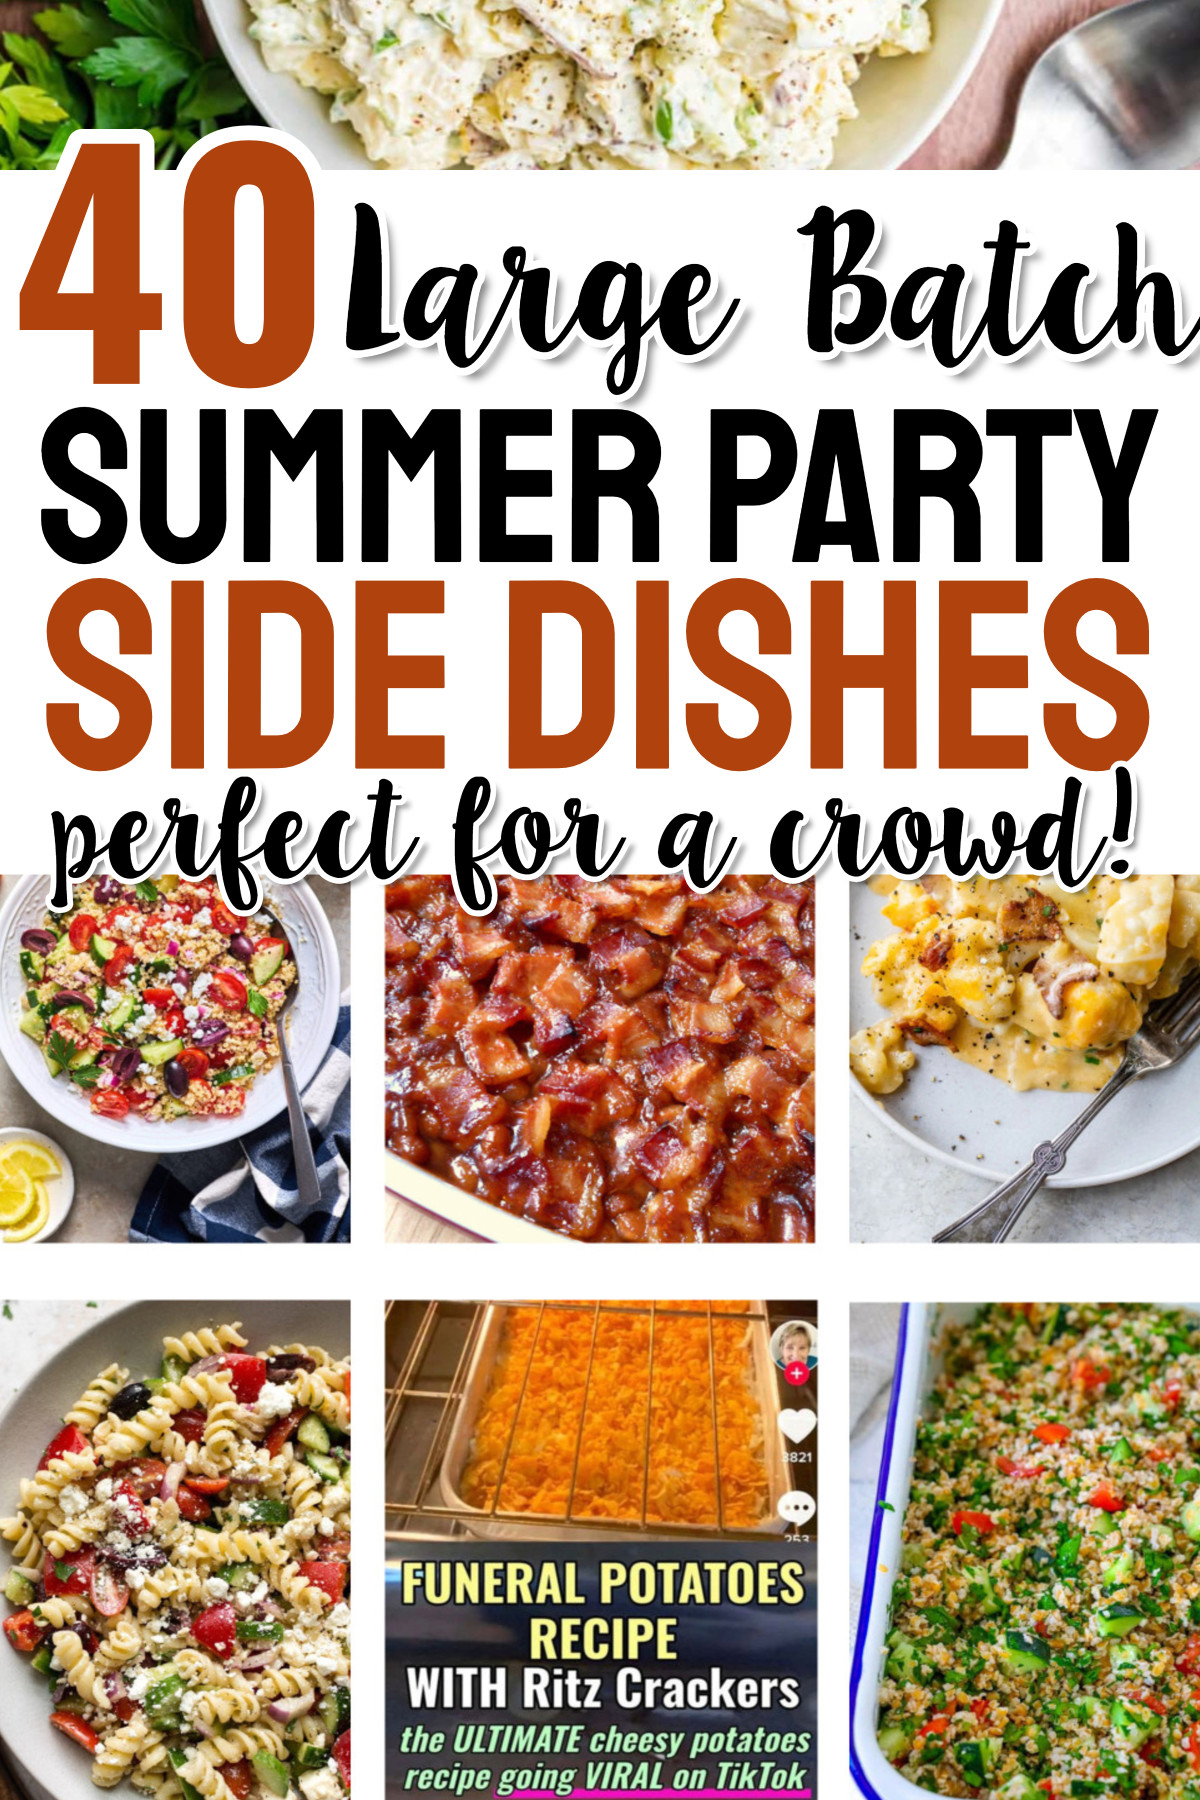 Large Batch Summer Party Side Dishes